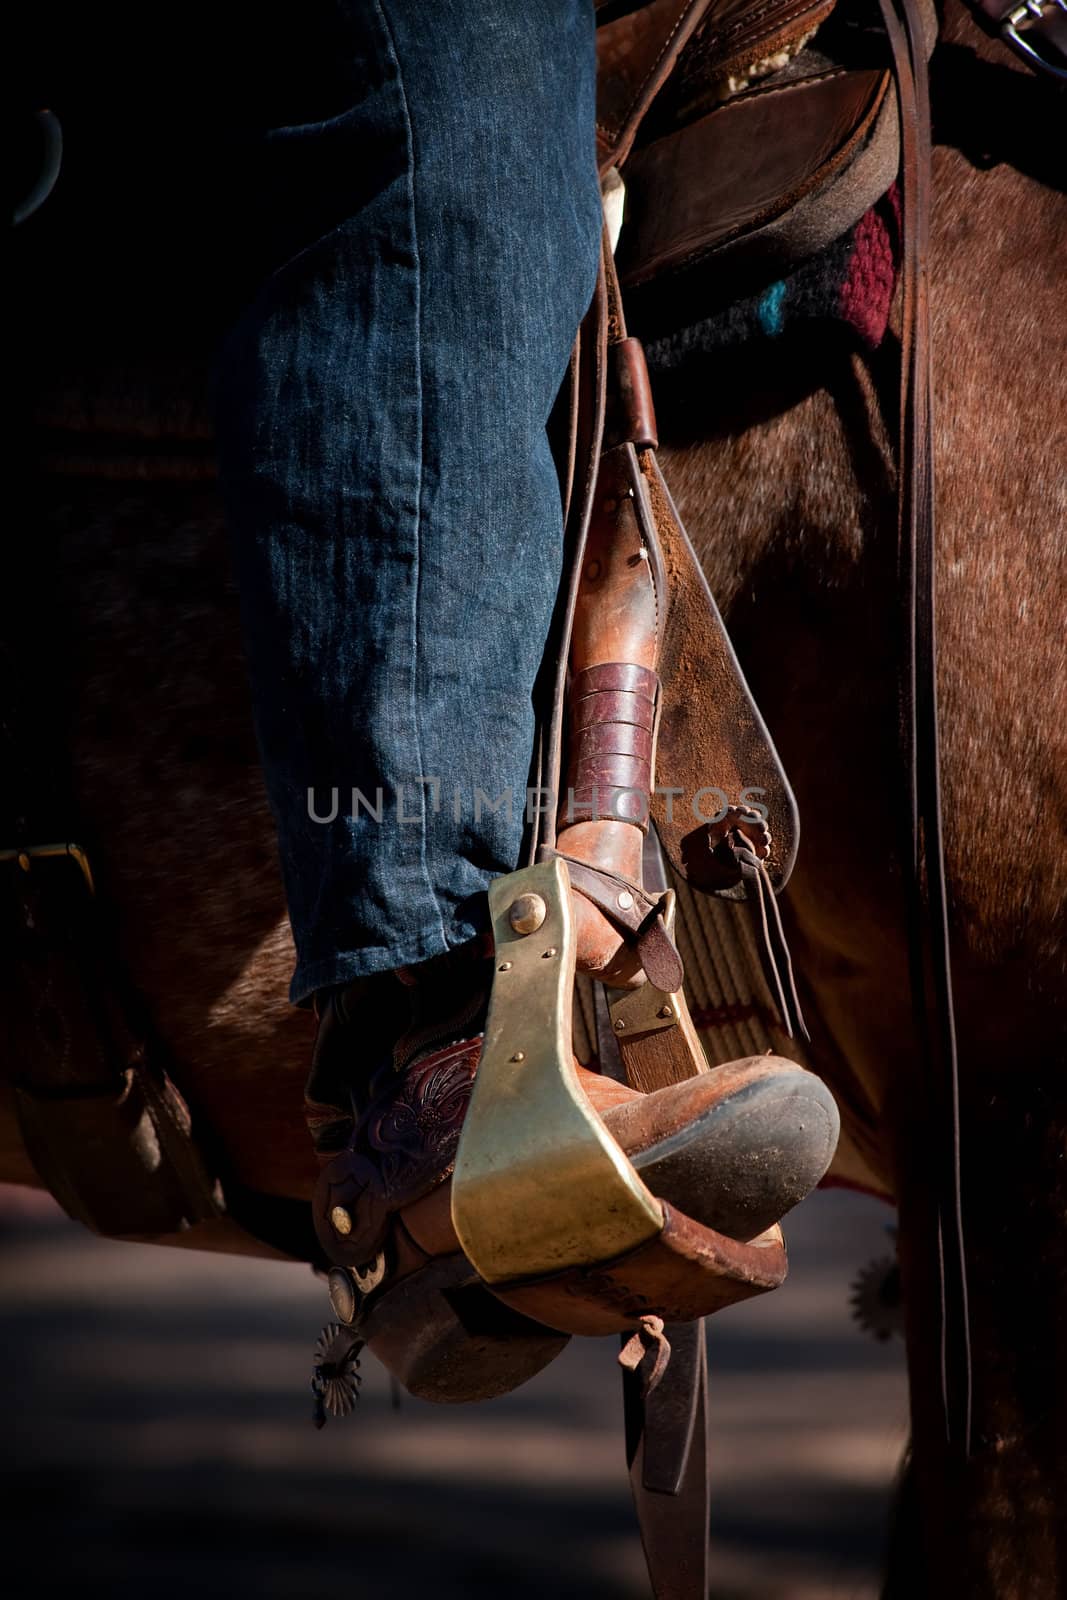 Cowboy leg and foot in stirrup on horse